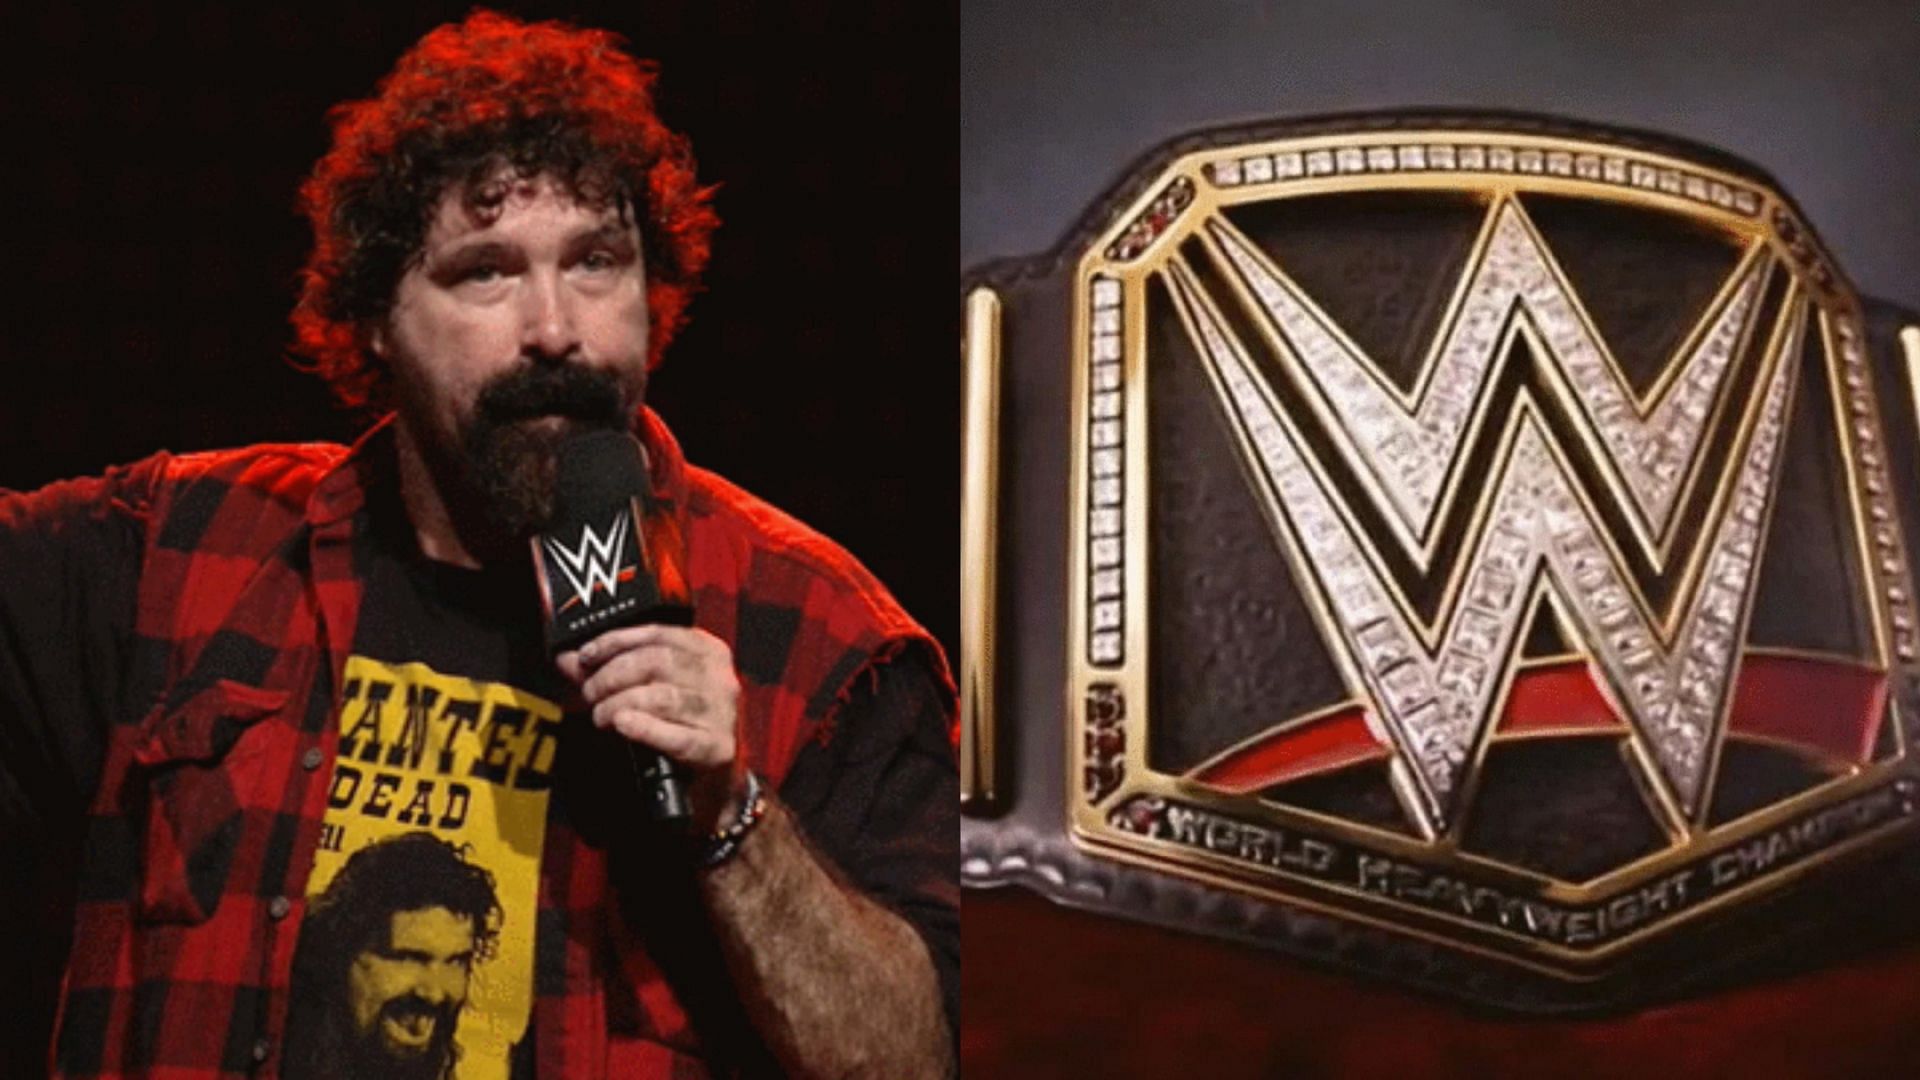 Mick Foley is a 3-time WWE Champion himself.